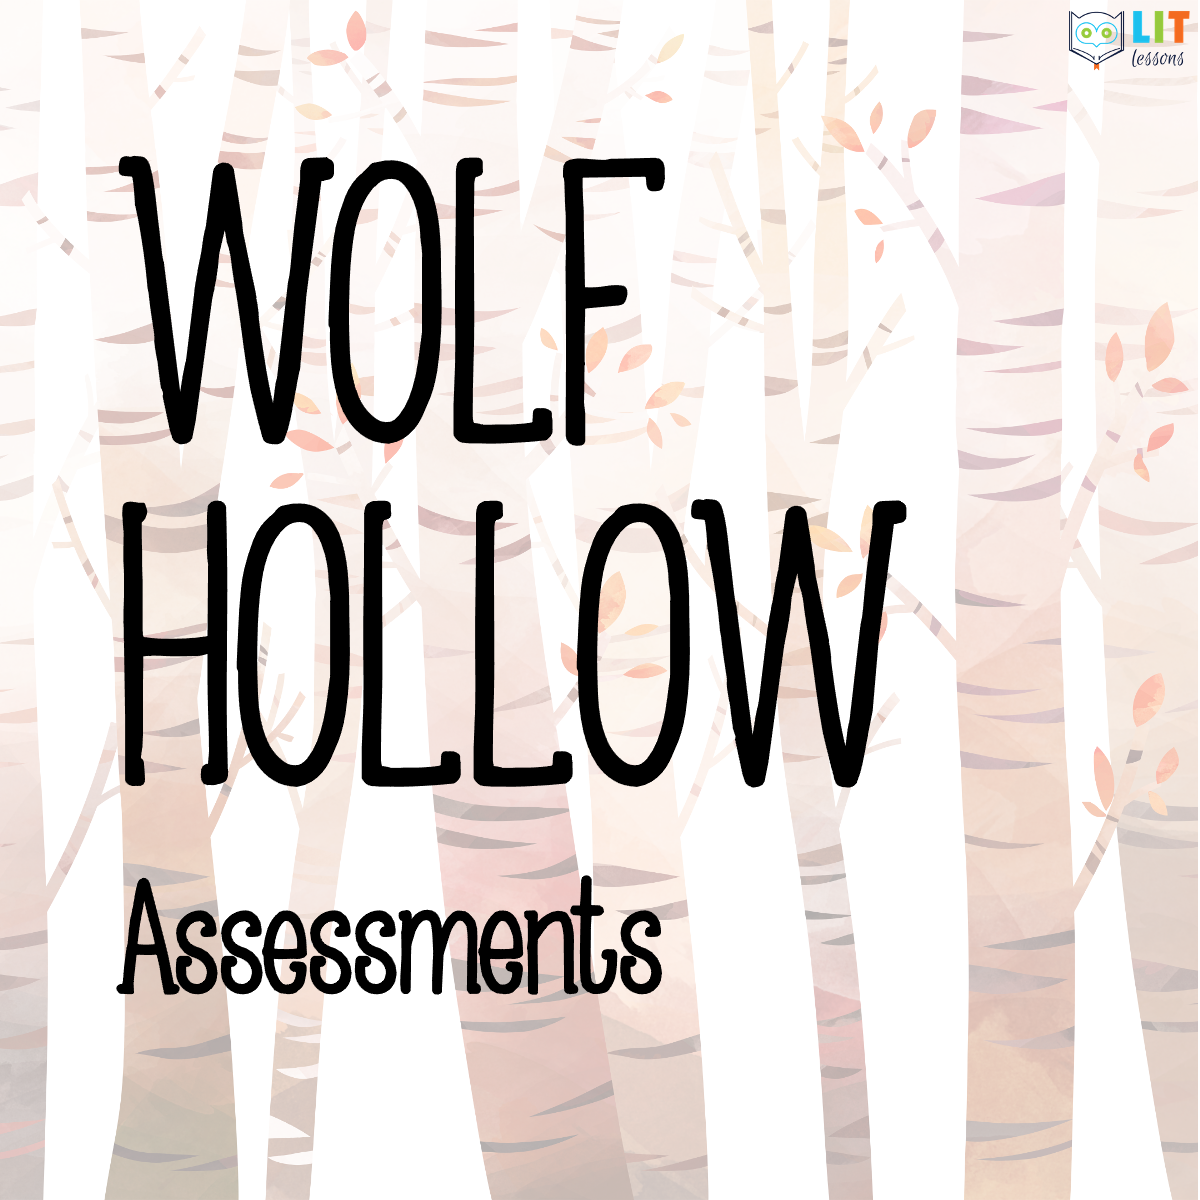 Wolf Hollow Assessments